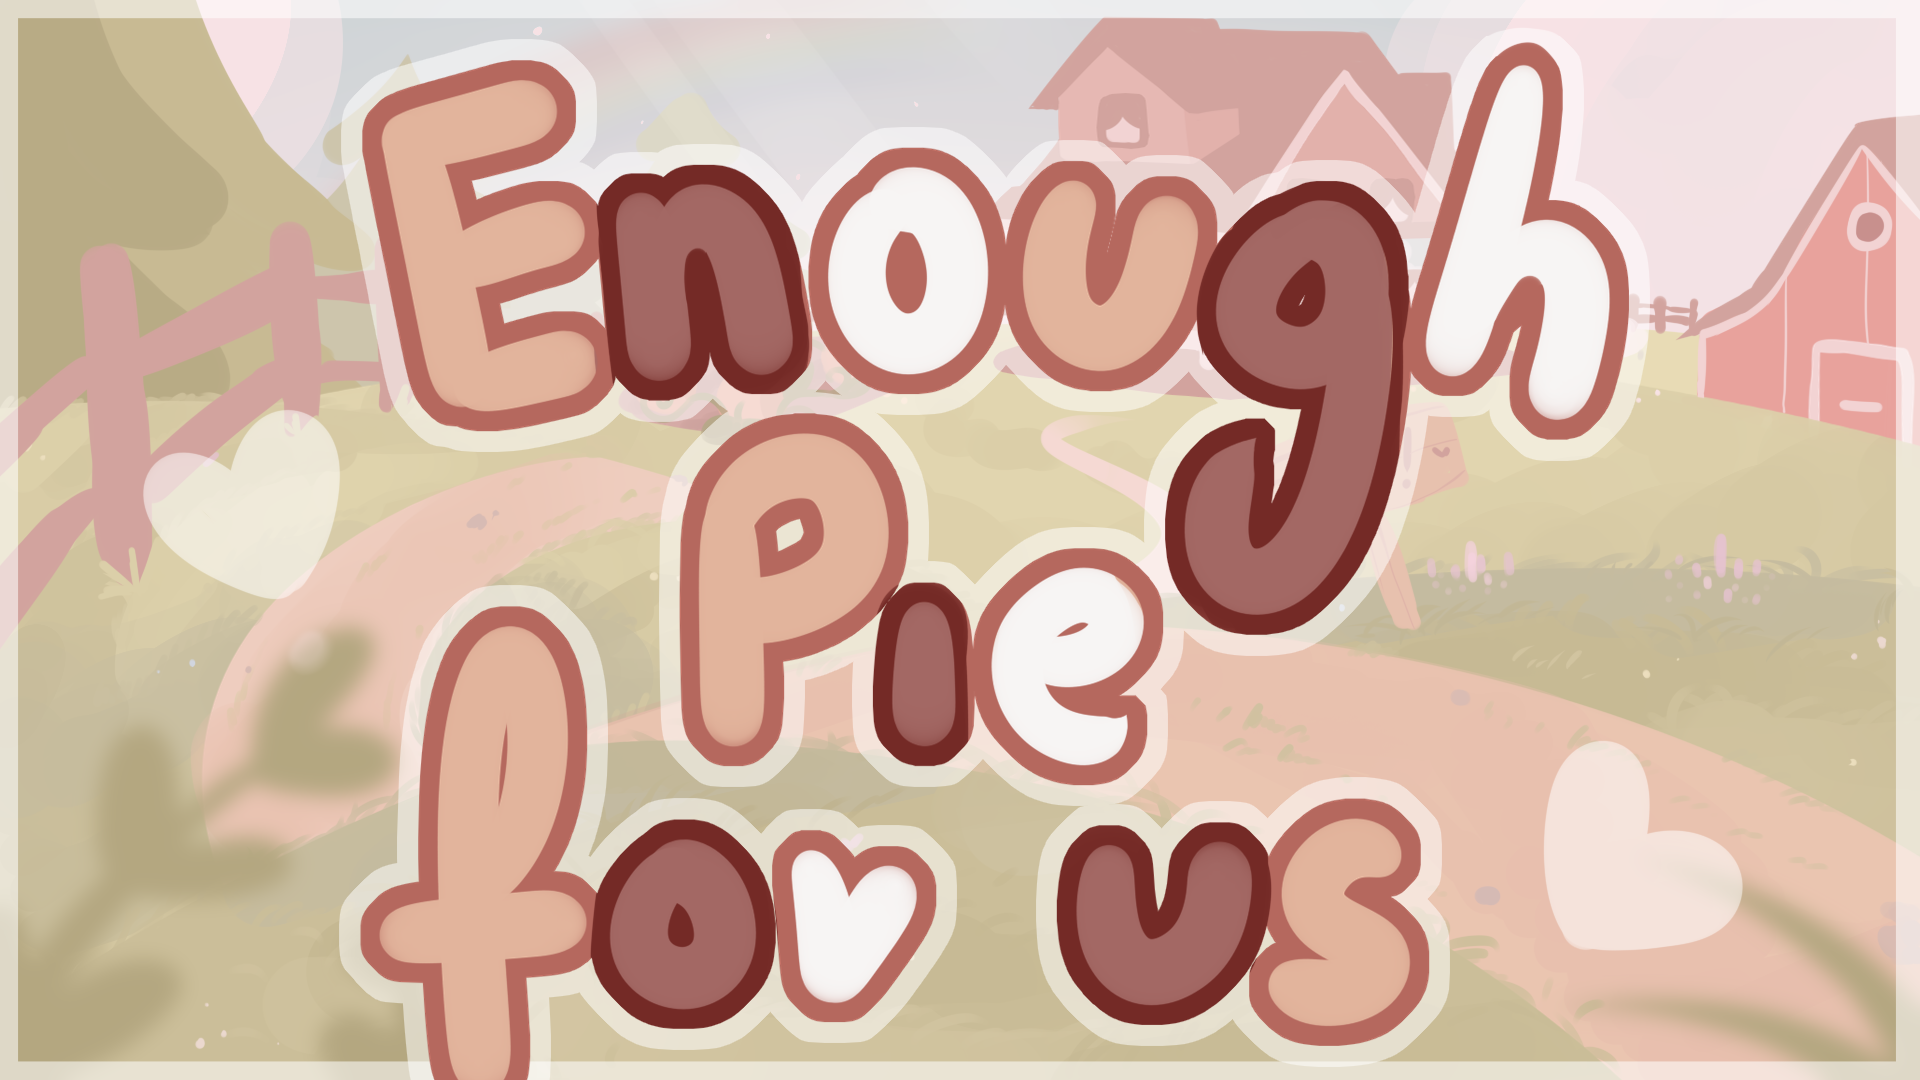 Enough pie for us